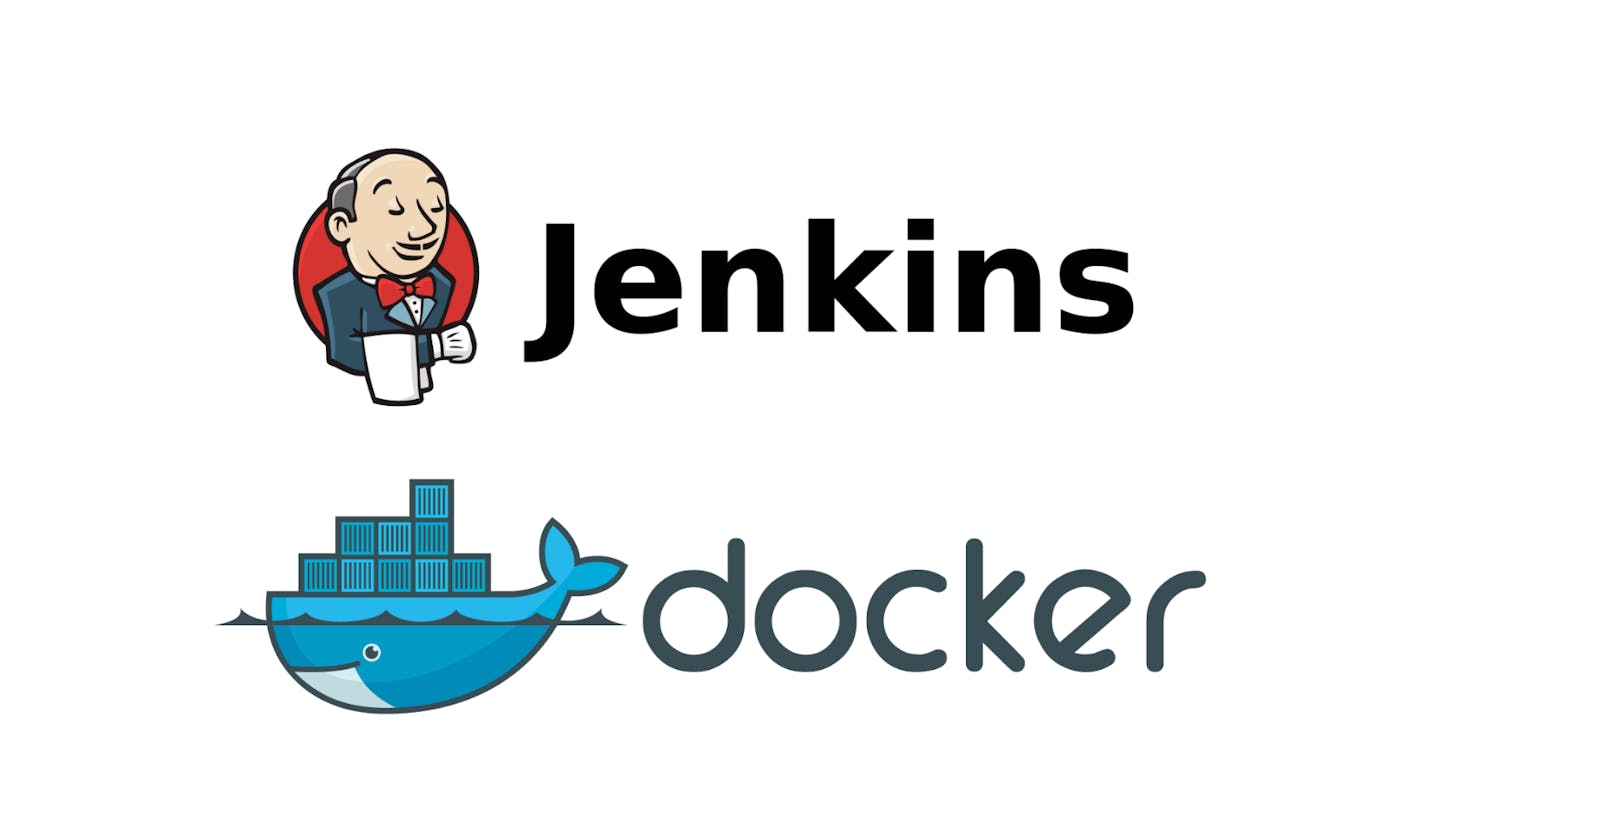 Setting up Jenkins for CI/CD and containerizing the application with Docker